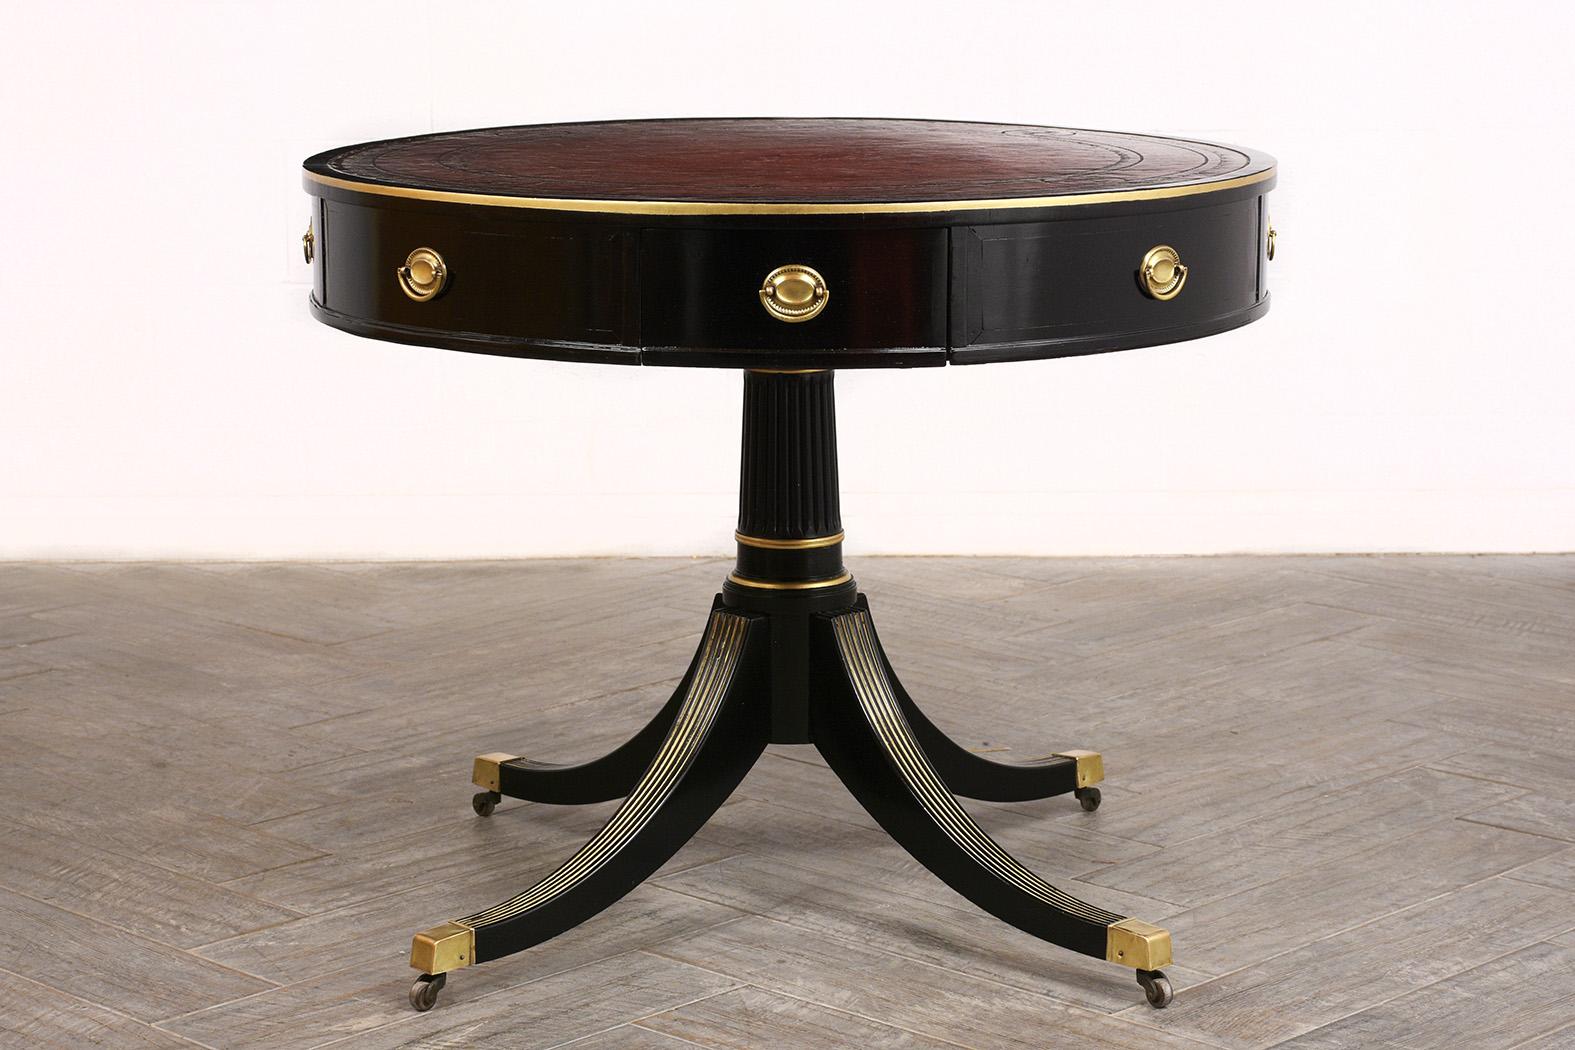 This early 1900s antique Regency-style center table comes with the original embossed leather top dyed in a dark redish-brown color with beautiful distressed details, ebonized finish, four faux drawers and two actual drawers with brass pull handles.